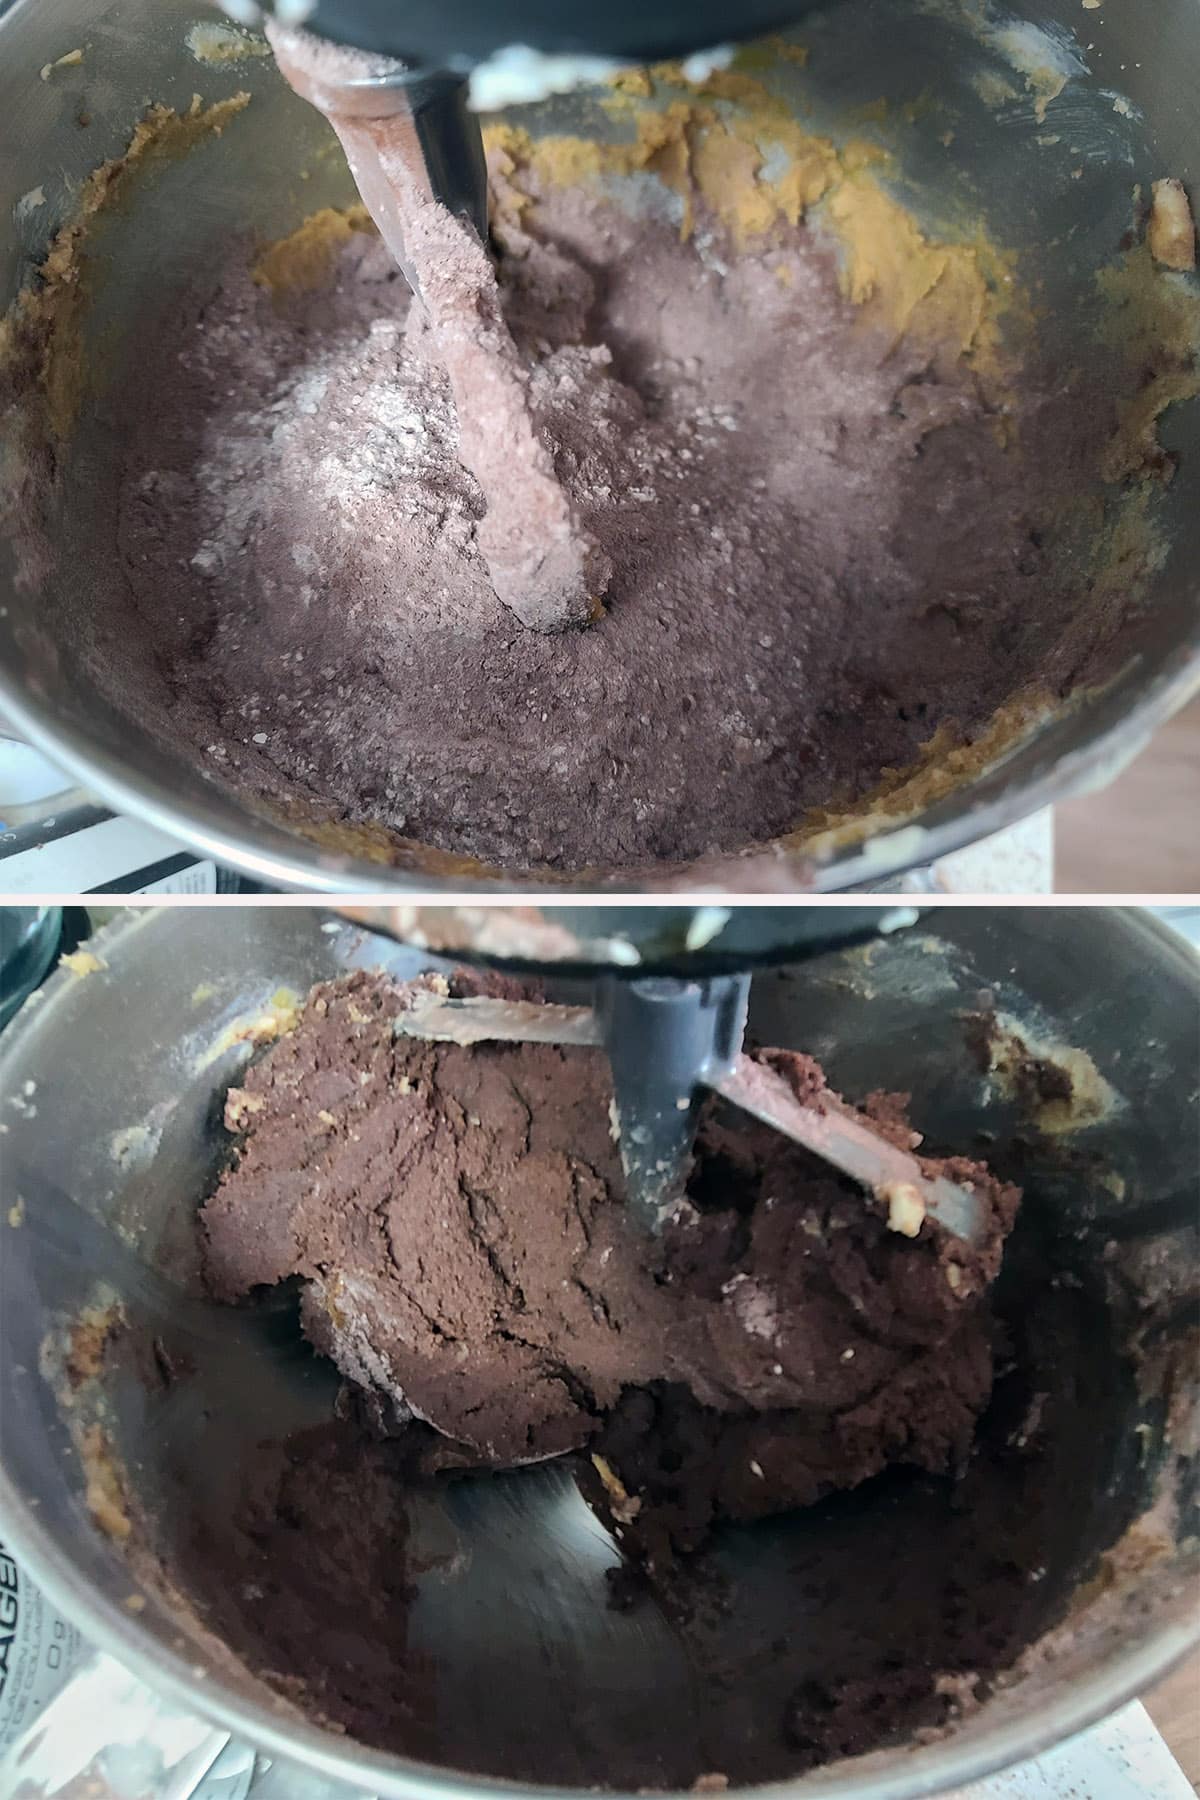 A 2 part image showing the dry ingredients being mixed into the wet ingredients.